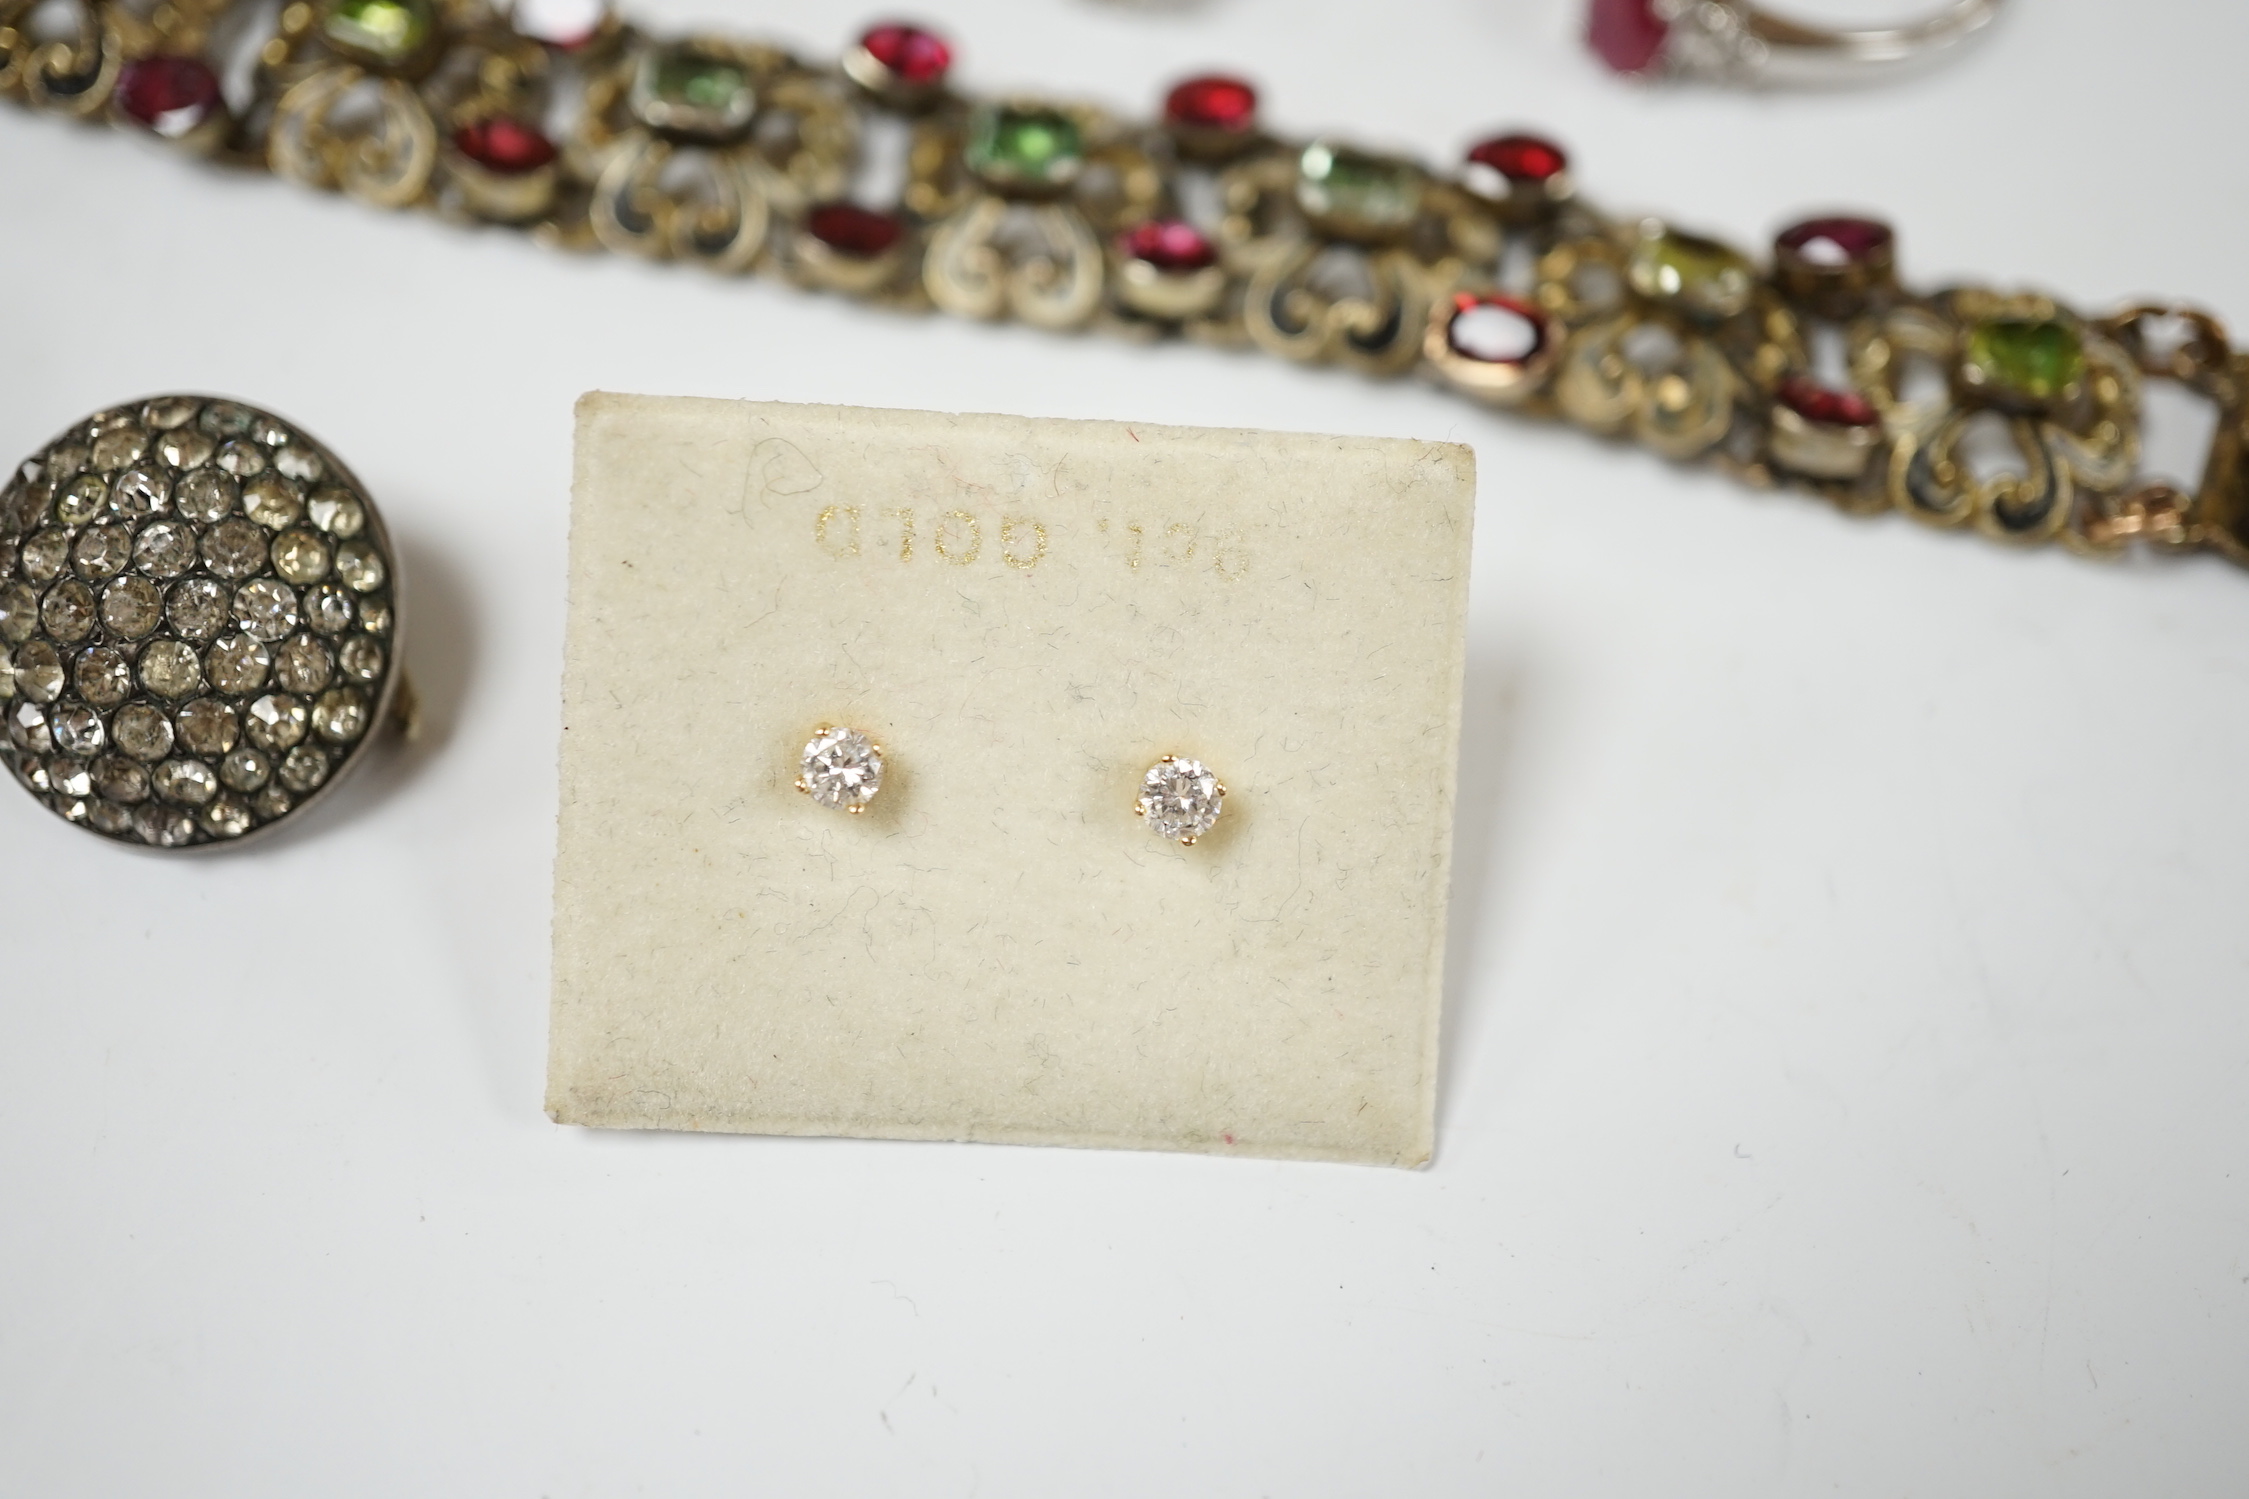 A small pair of diamond stud earrings, two 9ct white gold and gem set rings including diamond cluster and sundry other jewellery including An Austro-Hungarian style bracelet.